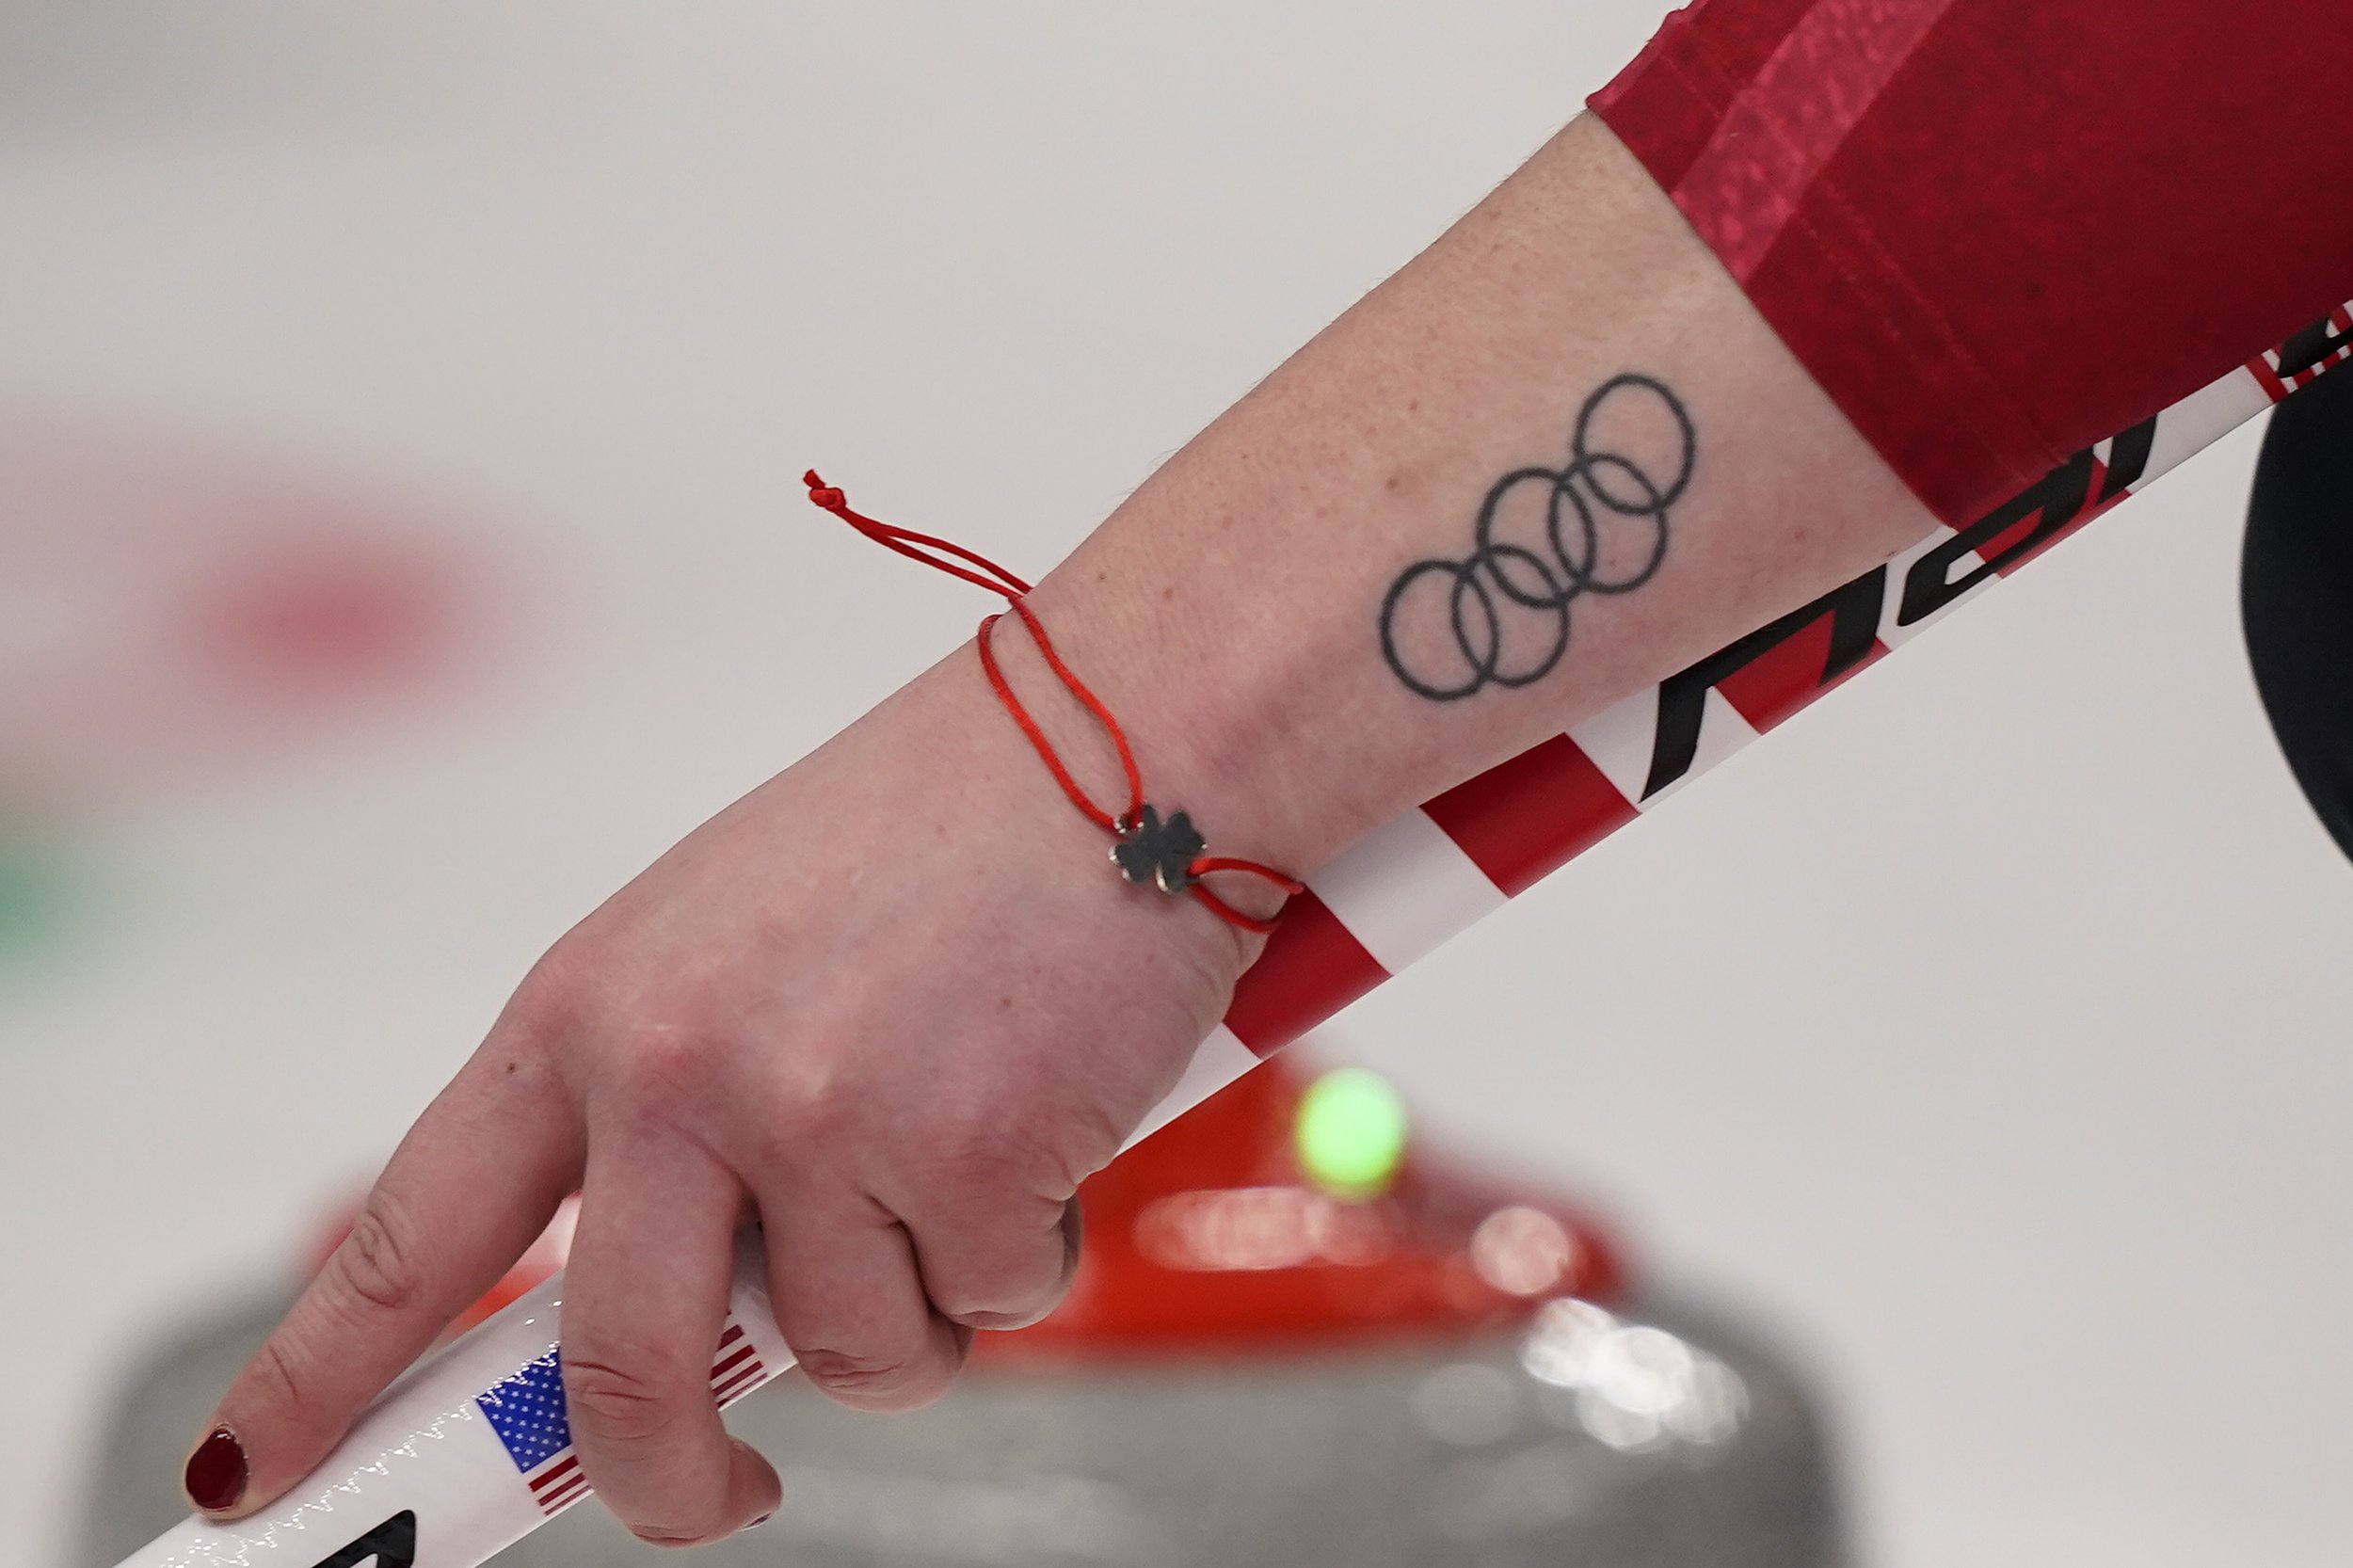  United States' Rebecca Hamilton holds a curling broom with a tattoo of the Olympics Rings during a women's curling match against the Russian Olympic Committee at the Beijing Winter Olympics Monday, Feb. 14, 2022, in Beijing. (AP Photo/Brynn Anderson